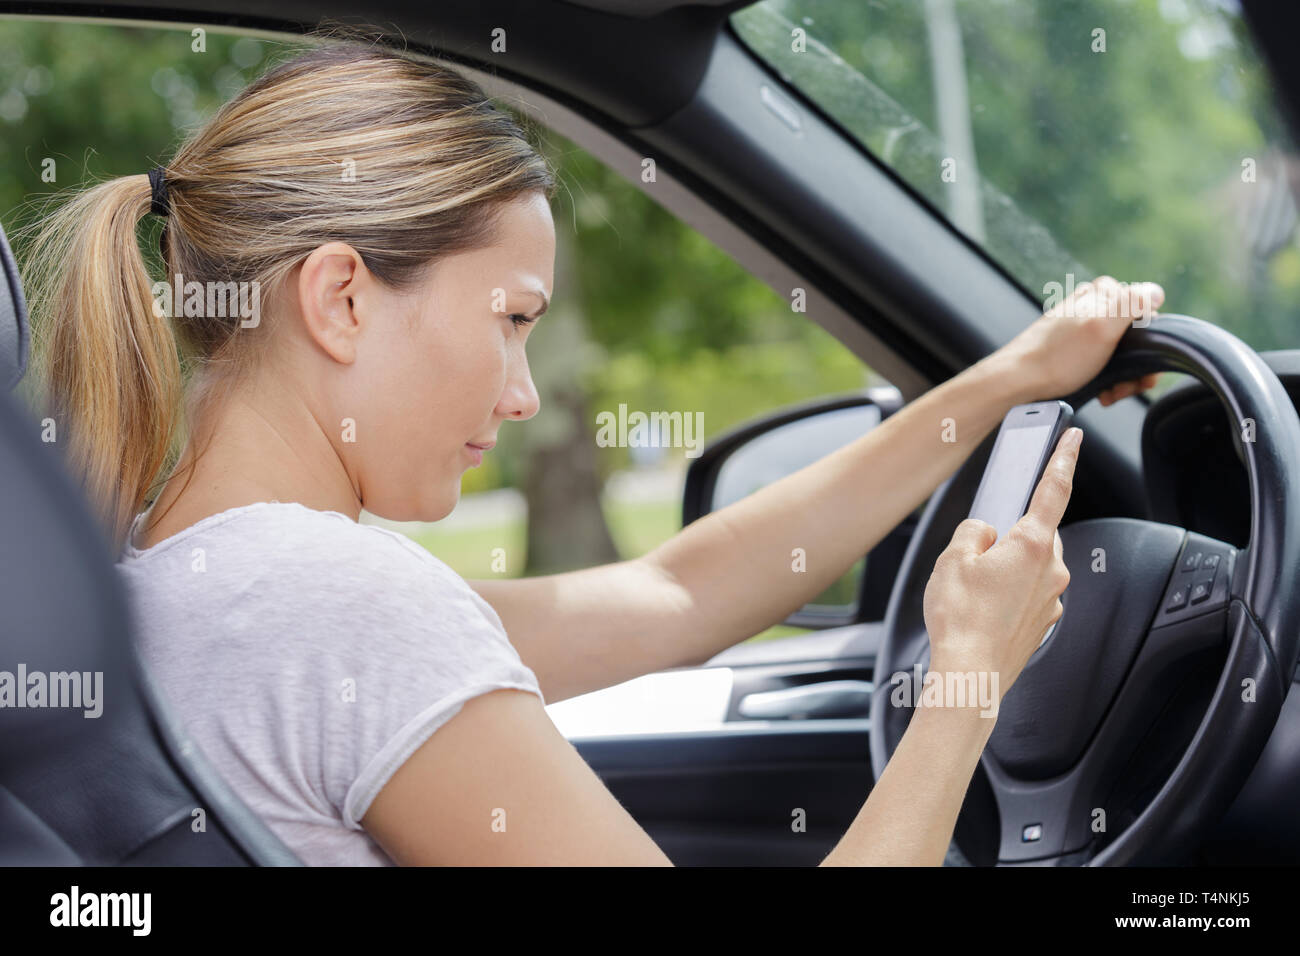 woman driving a car whilst using mobile phone Stock Photo